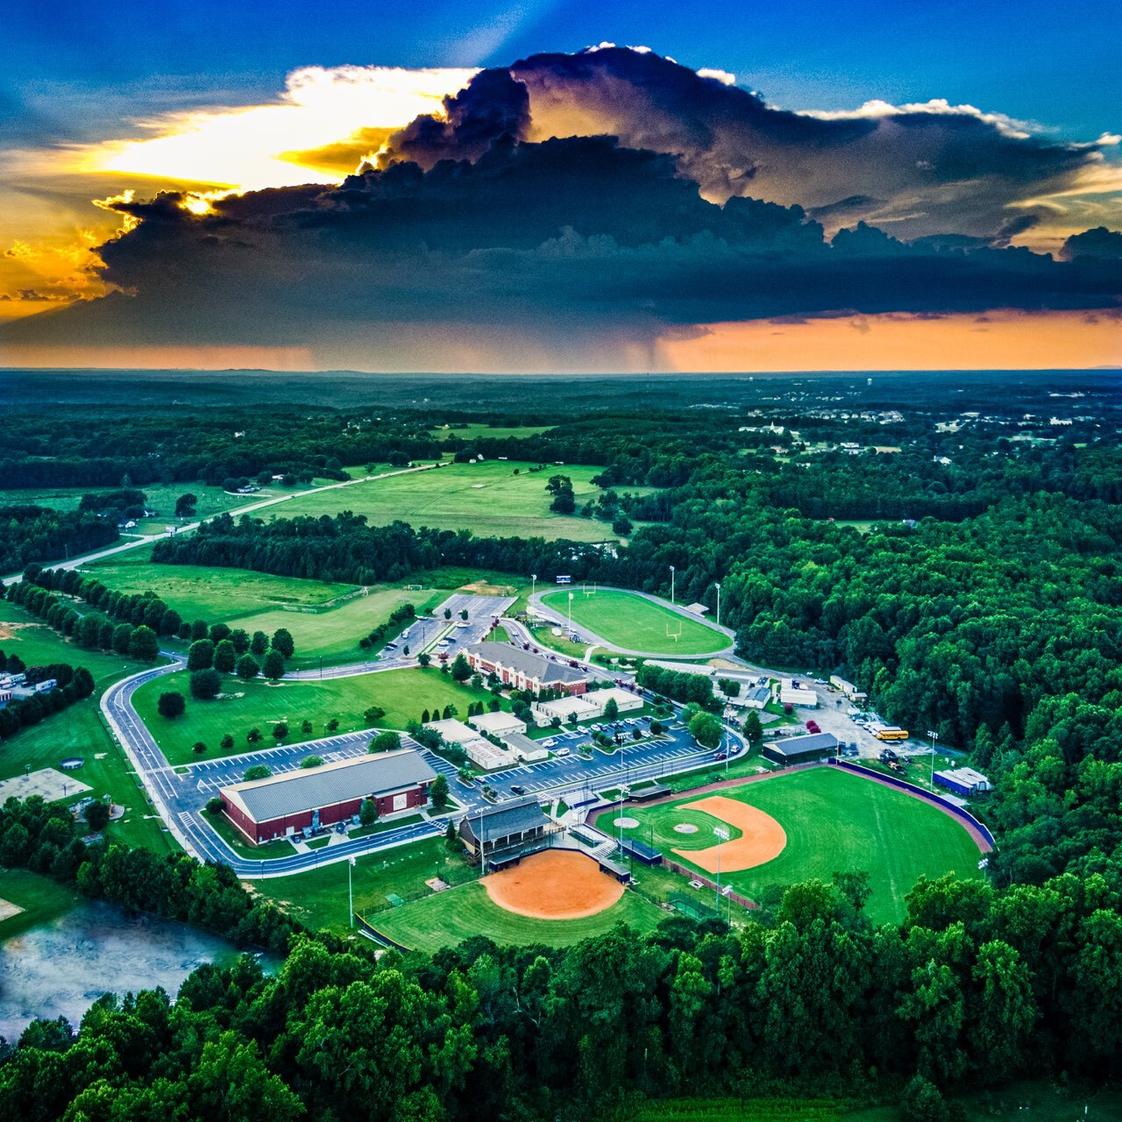 Loganville Christian Academy Photo - Located on 75 beautiful acres in Loganville, GA with over 90,000 square feet of instructional space and award-winning athletic facilities.